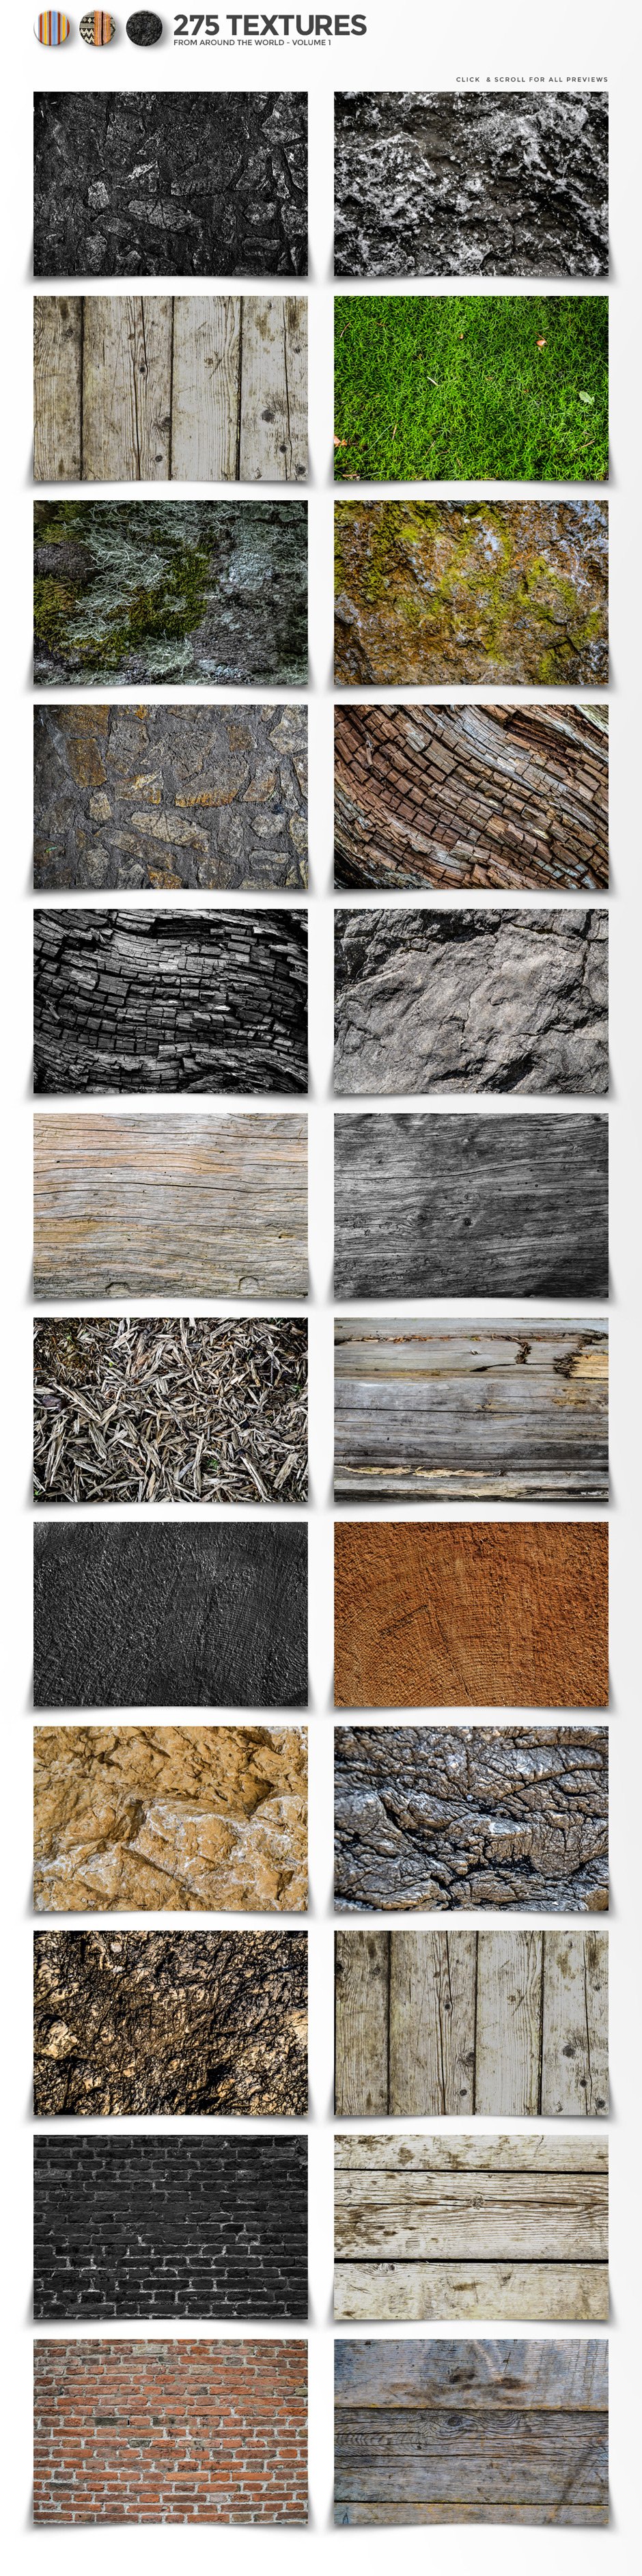 275 World Textures From Around The Globe